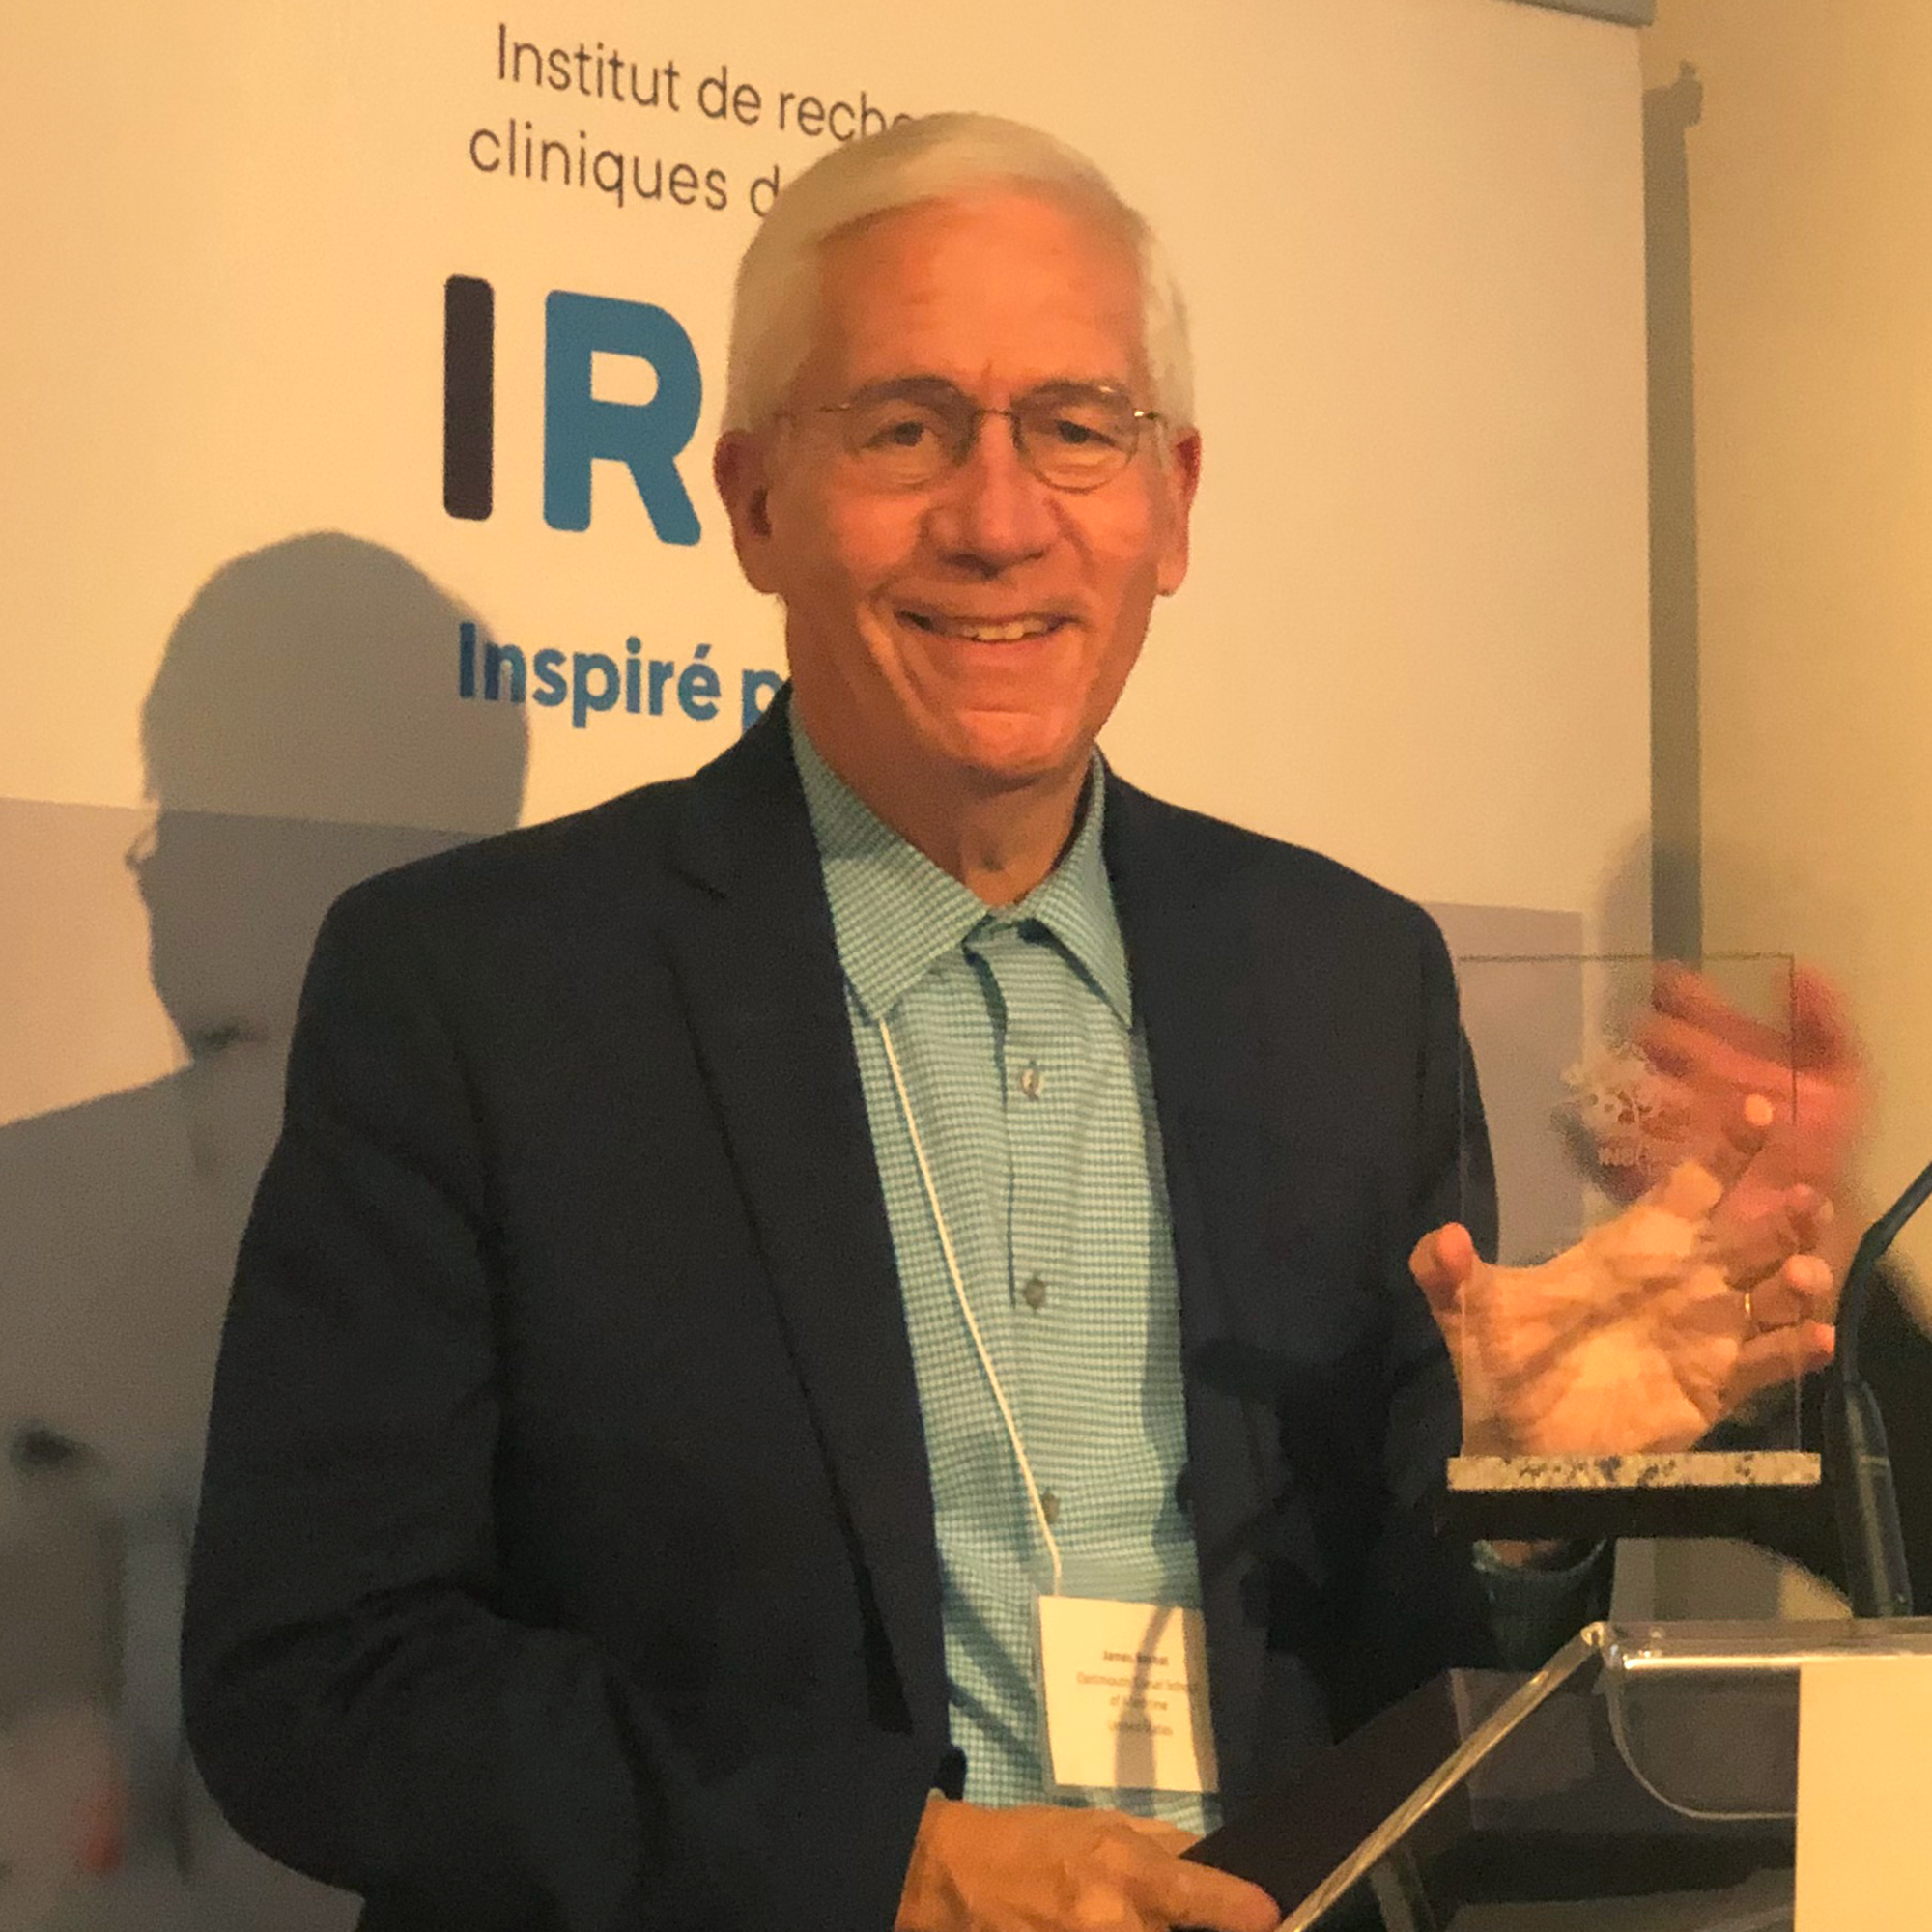 Dr. James Bernat holding a glass award at the 2022 INS Annual Meeting in Montreal, Canada;